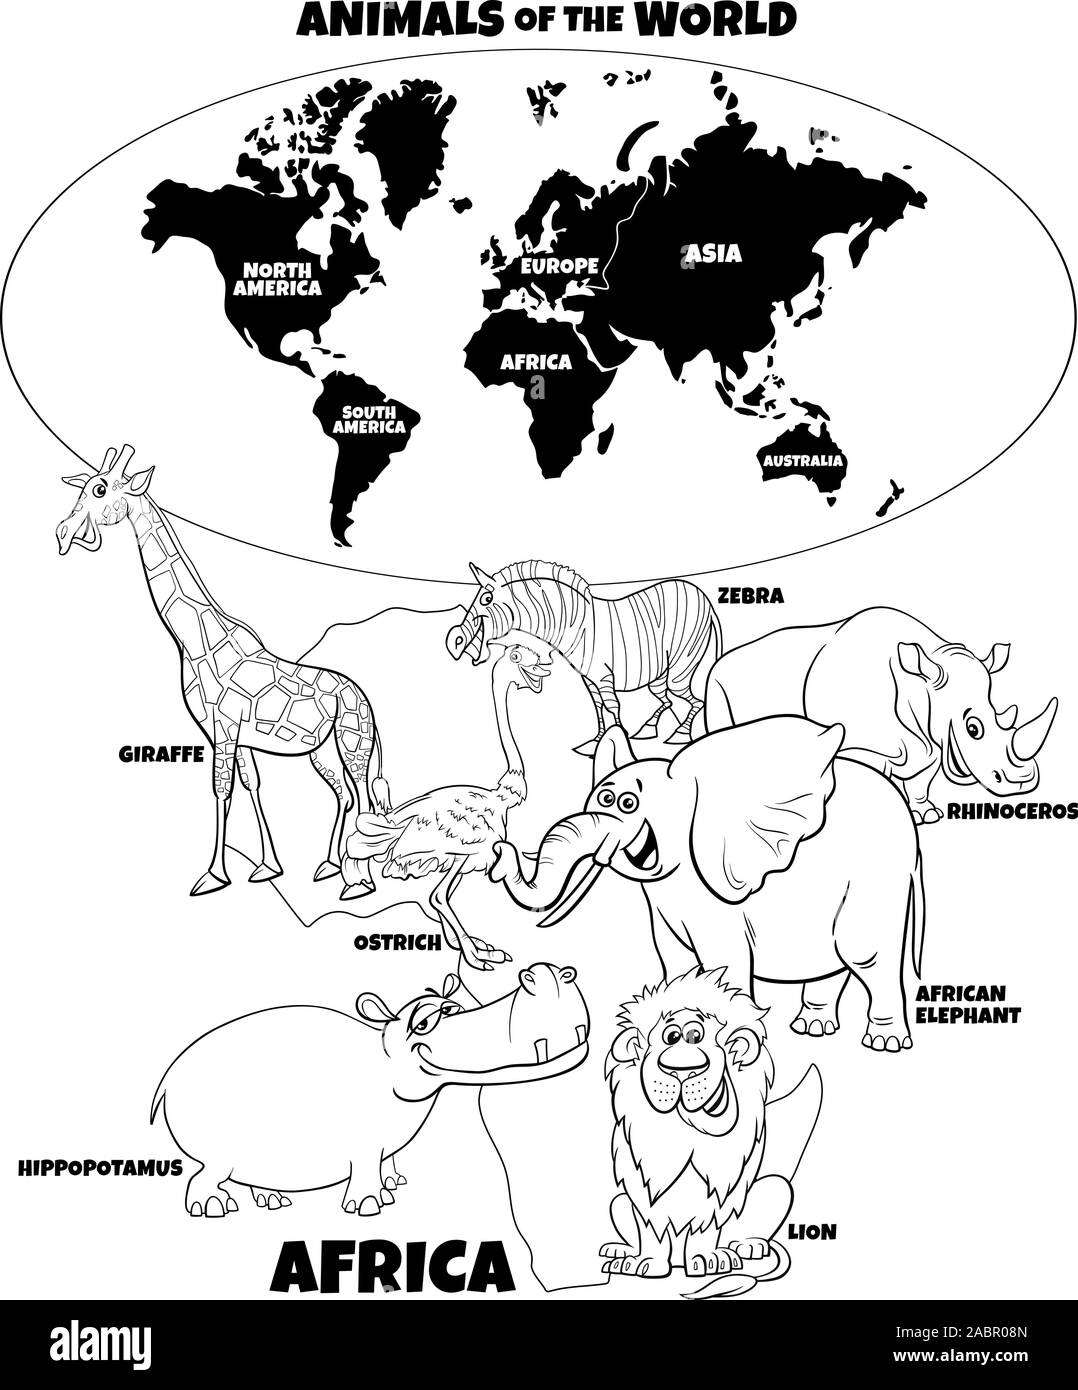 Black and White Educational Cartoon Illustration of African Animals and World Map with Continents Coloring Book Page Stock Vector